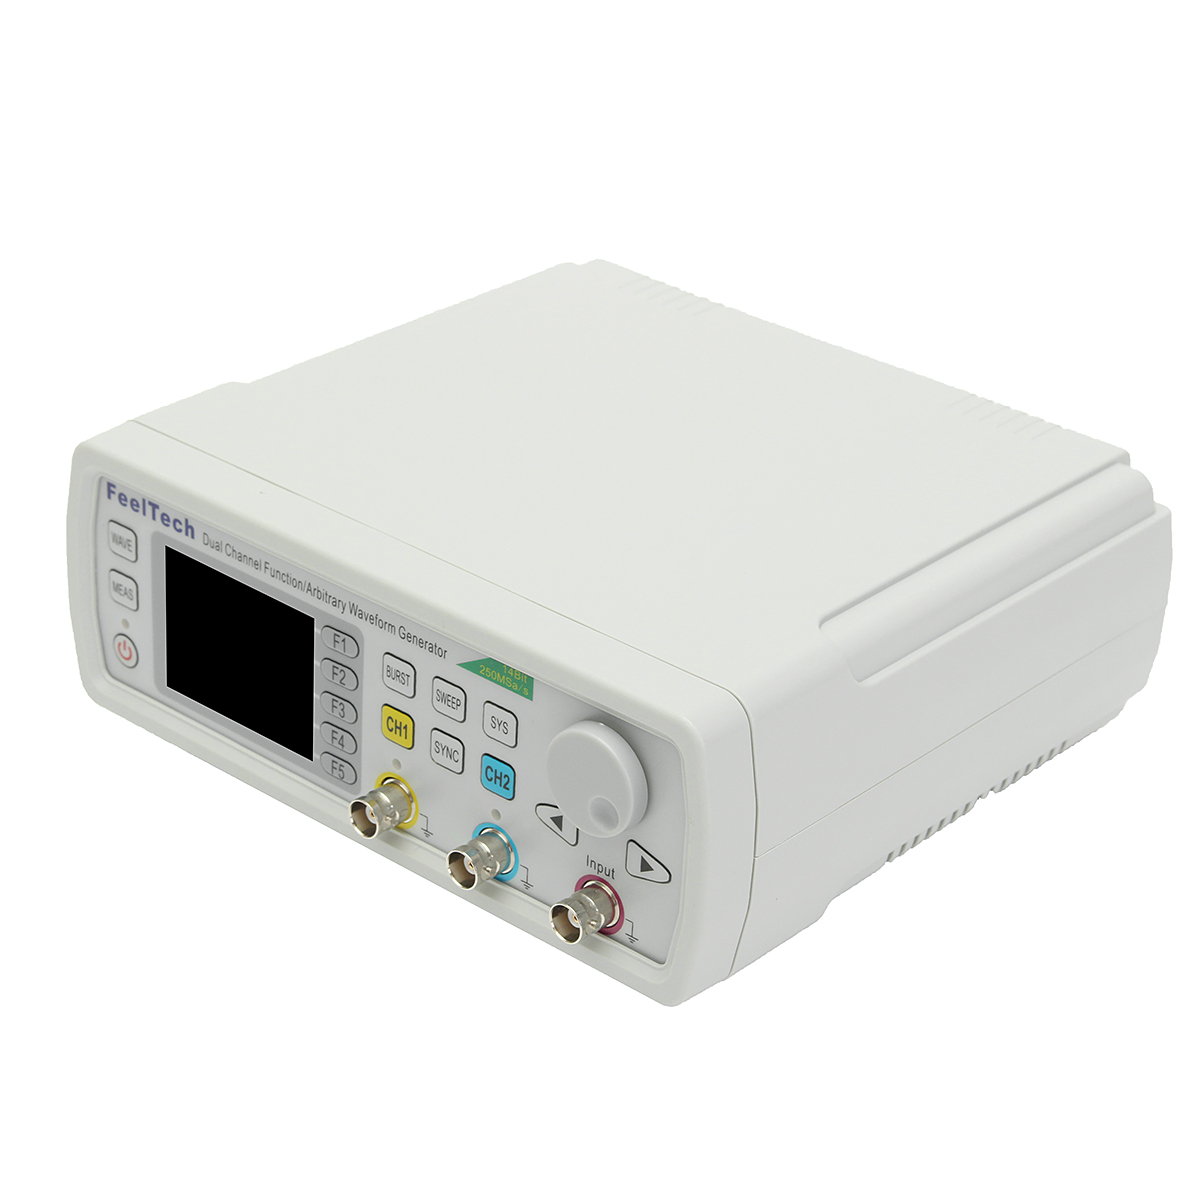 FY6600 Digital 12-60MHz Dual Channel DDS Function Arbitrary Waveform Signal Generator Frequency Meter 34